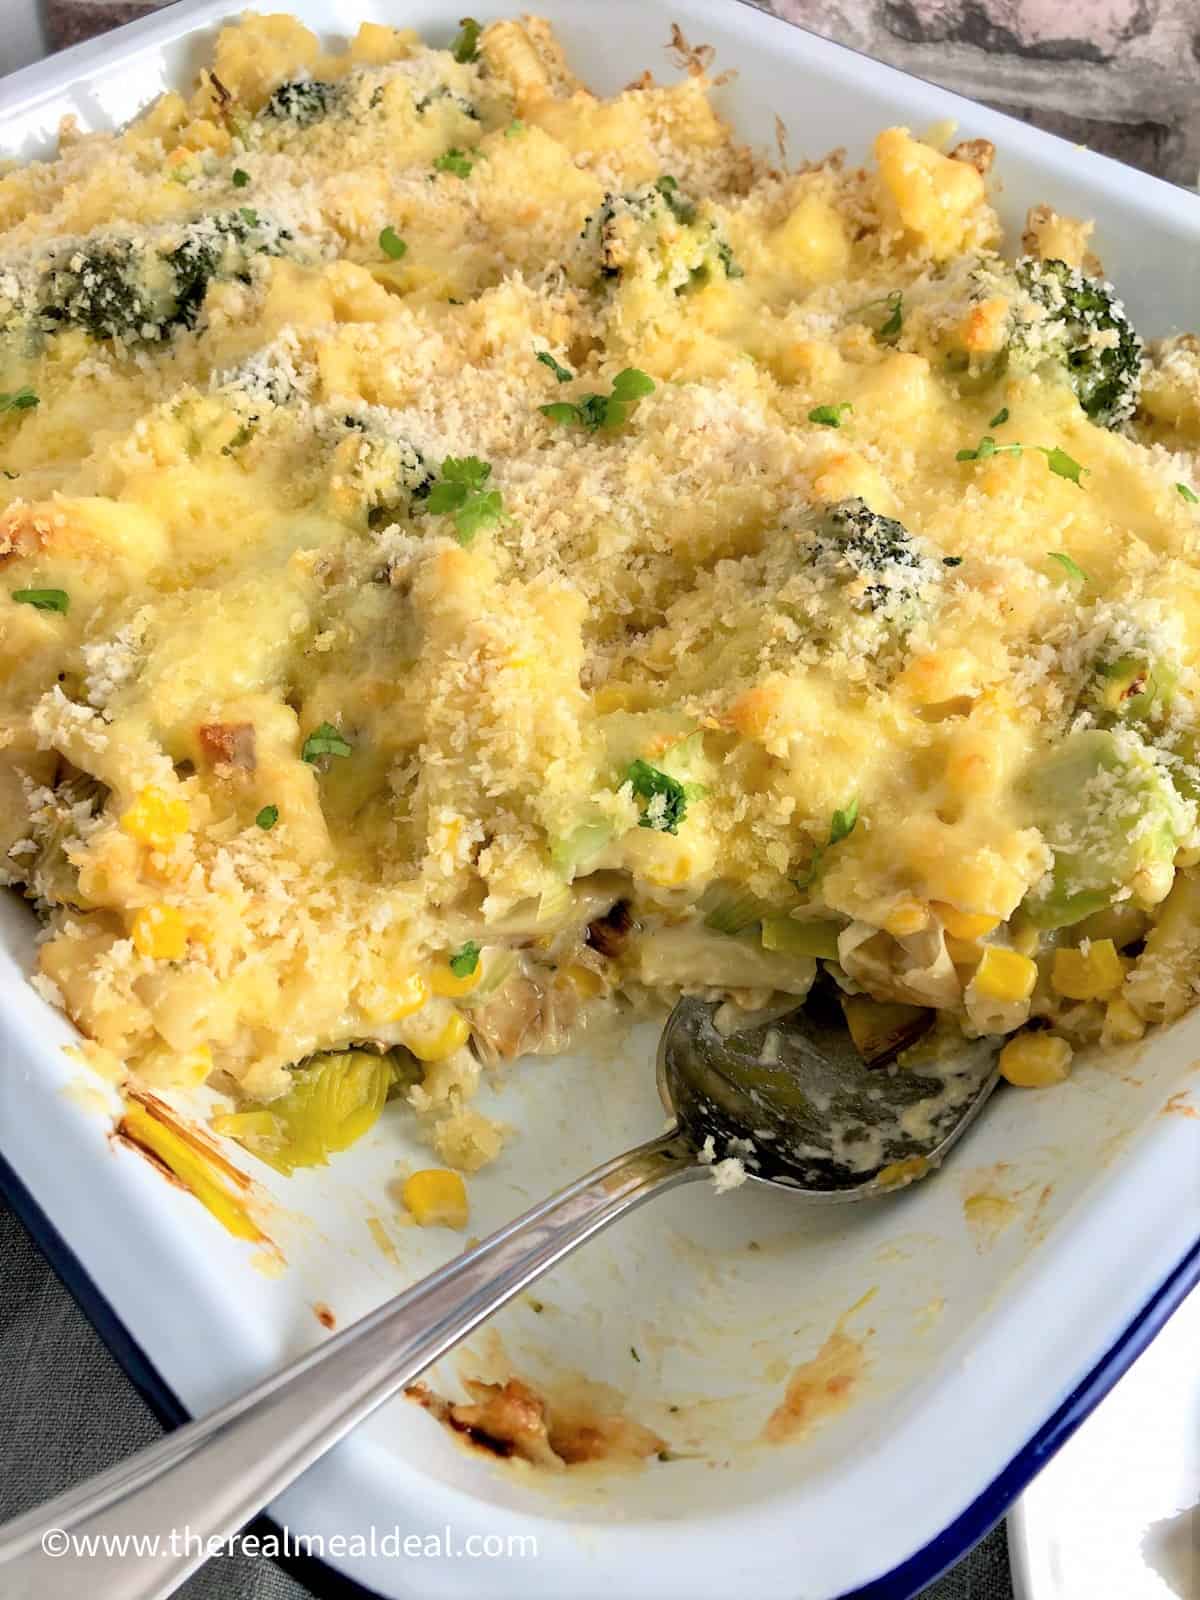 baked macaroni in tray with portion served